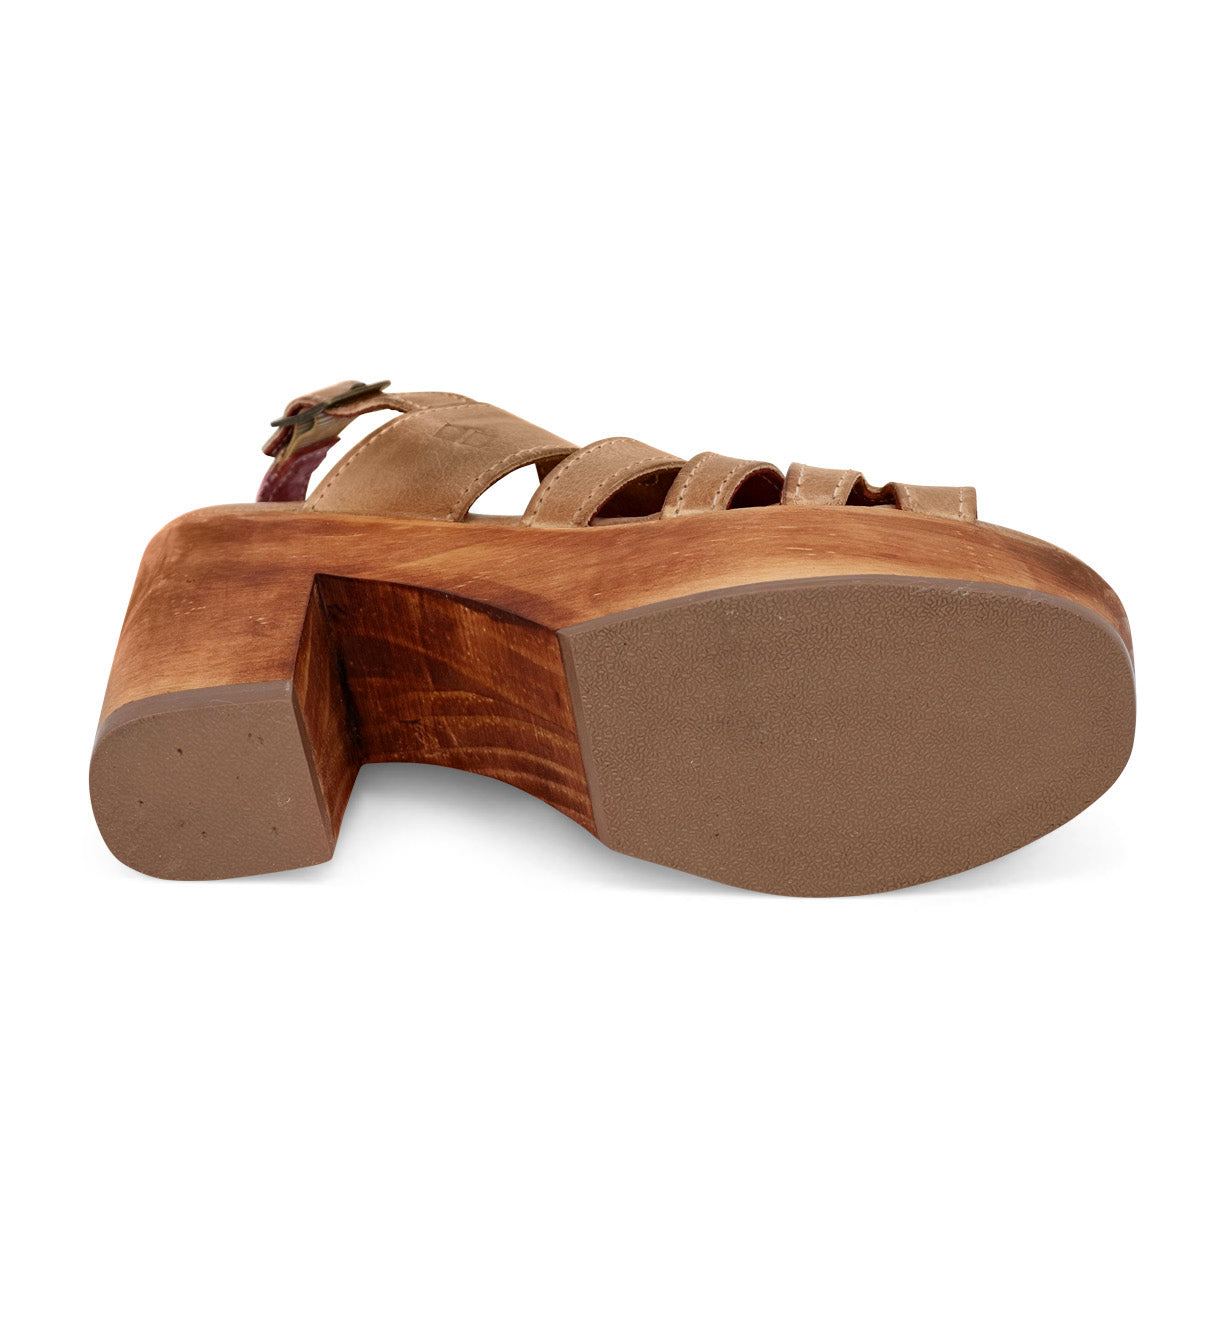 A pair of Fontella sandals from Bed Stu with wooden soles and a wooden heel.